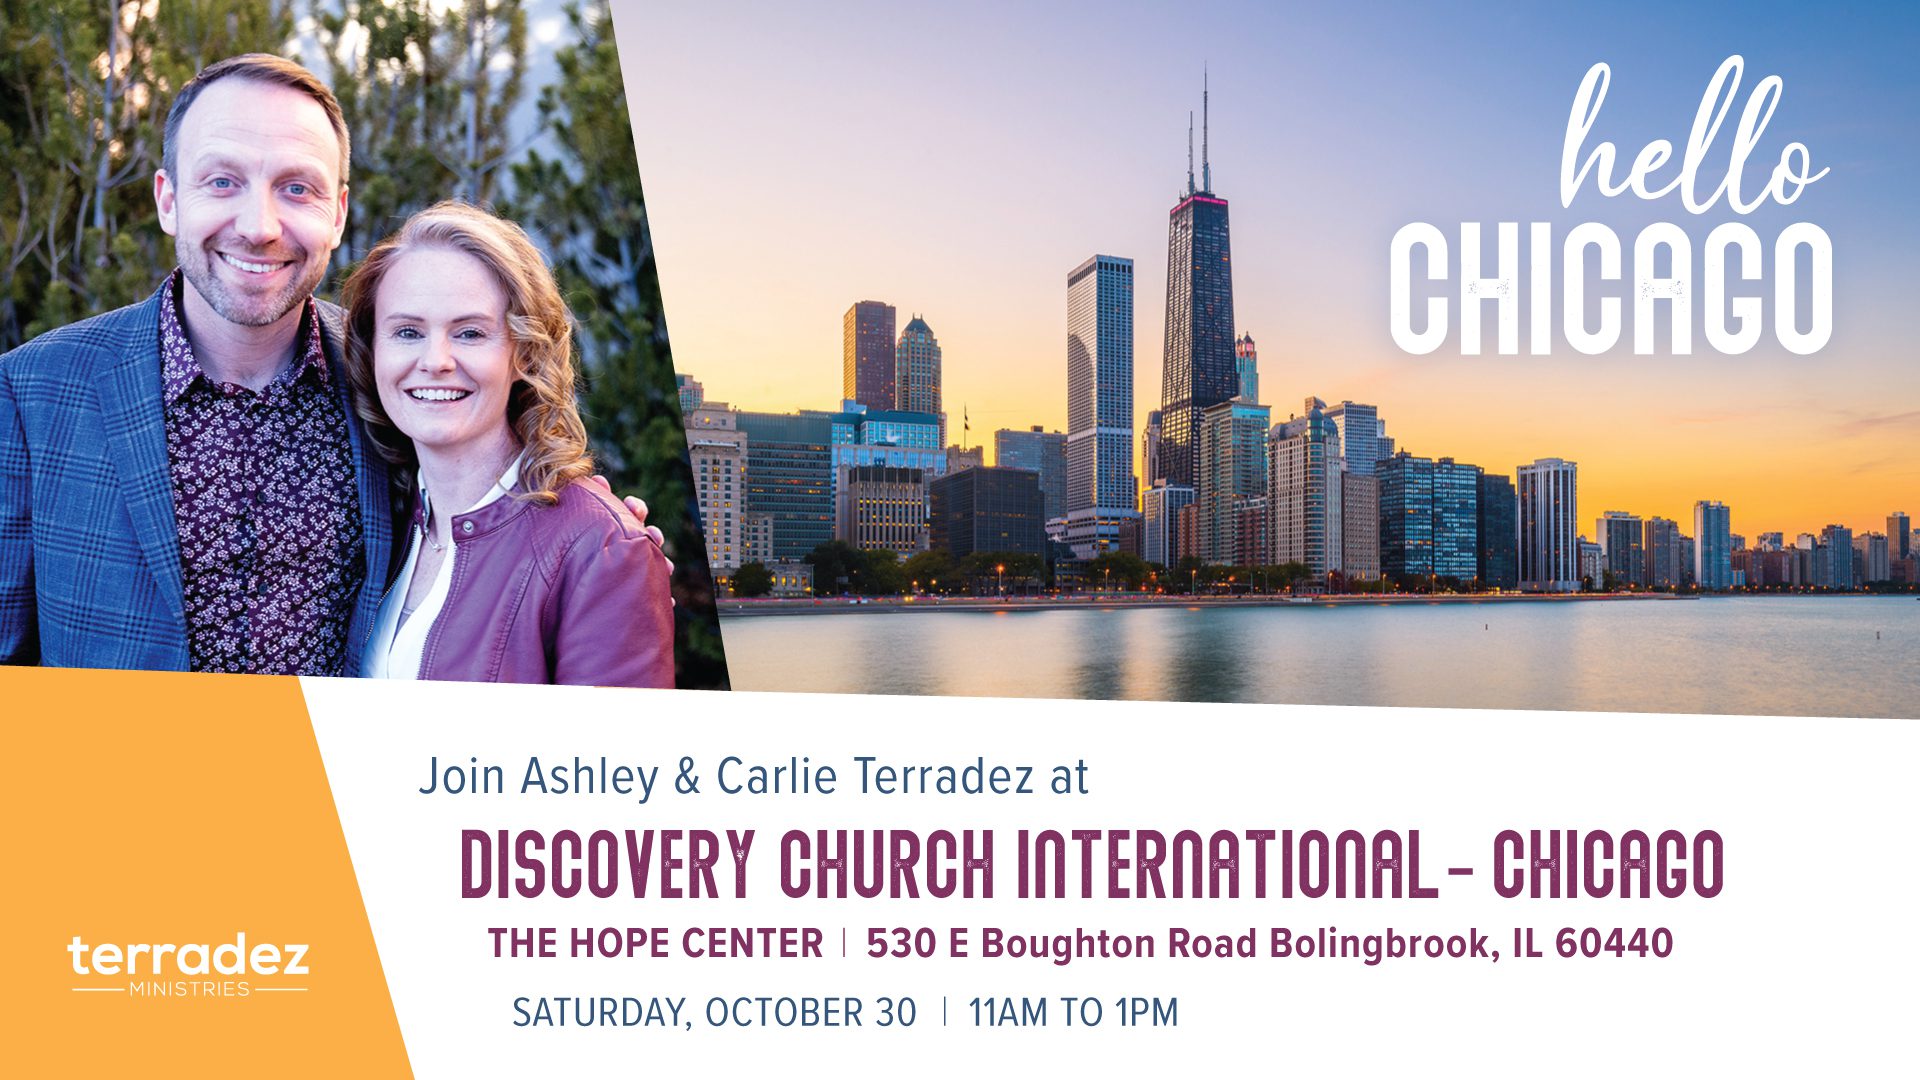 Ashley and Carlie Terradez at Discovery Church-Chicago on October 20 at 11am.